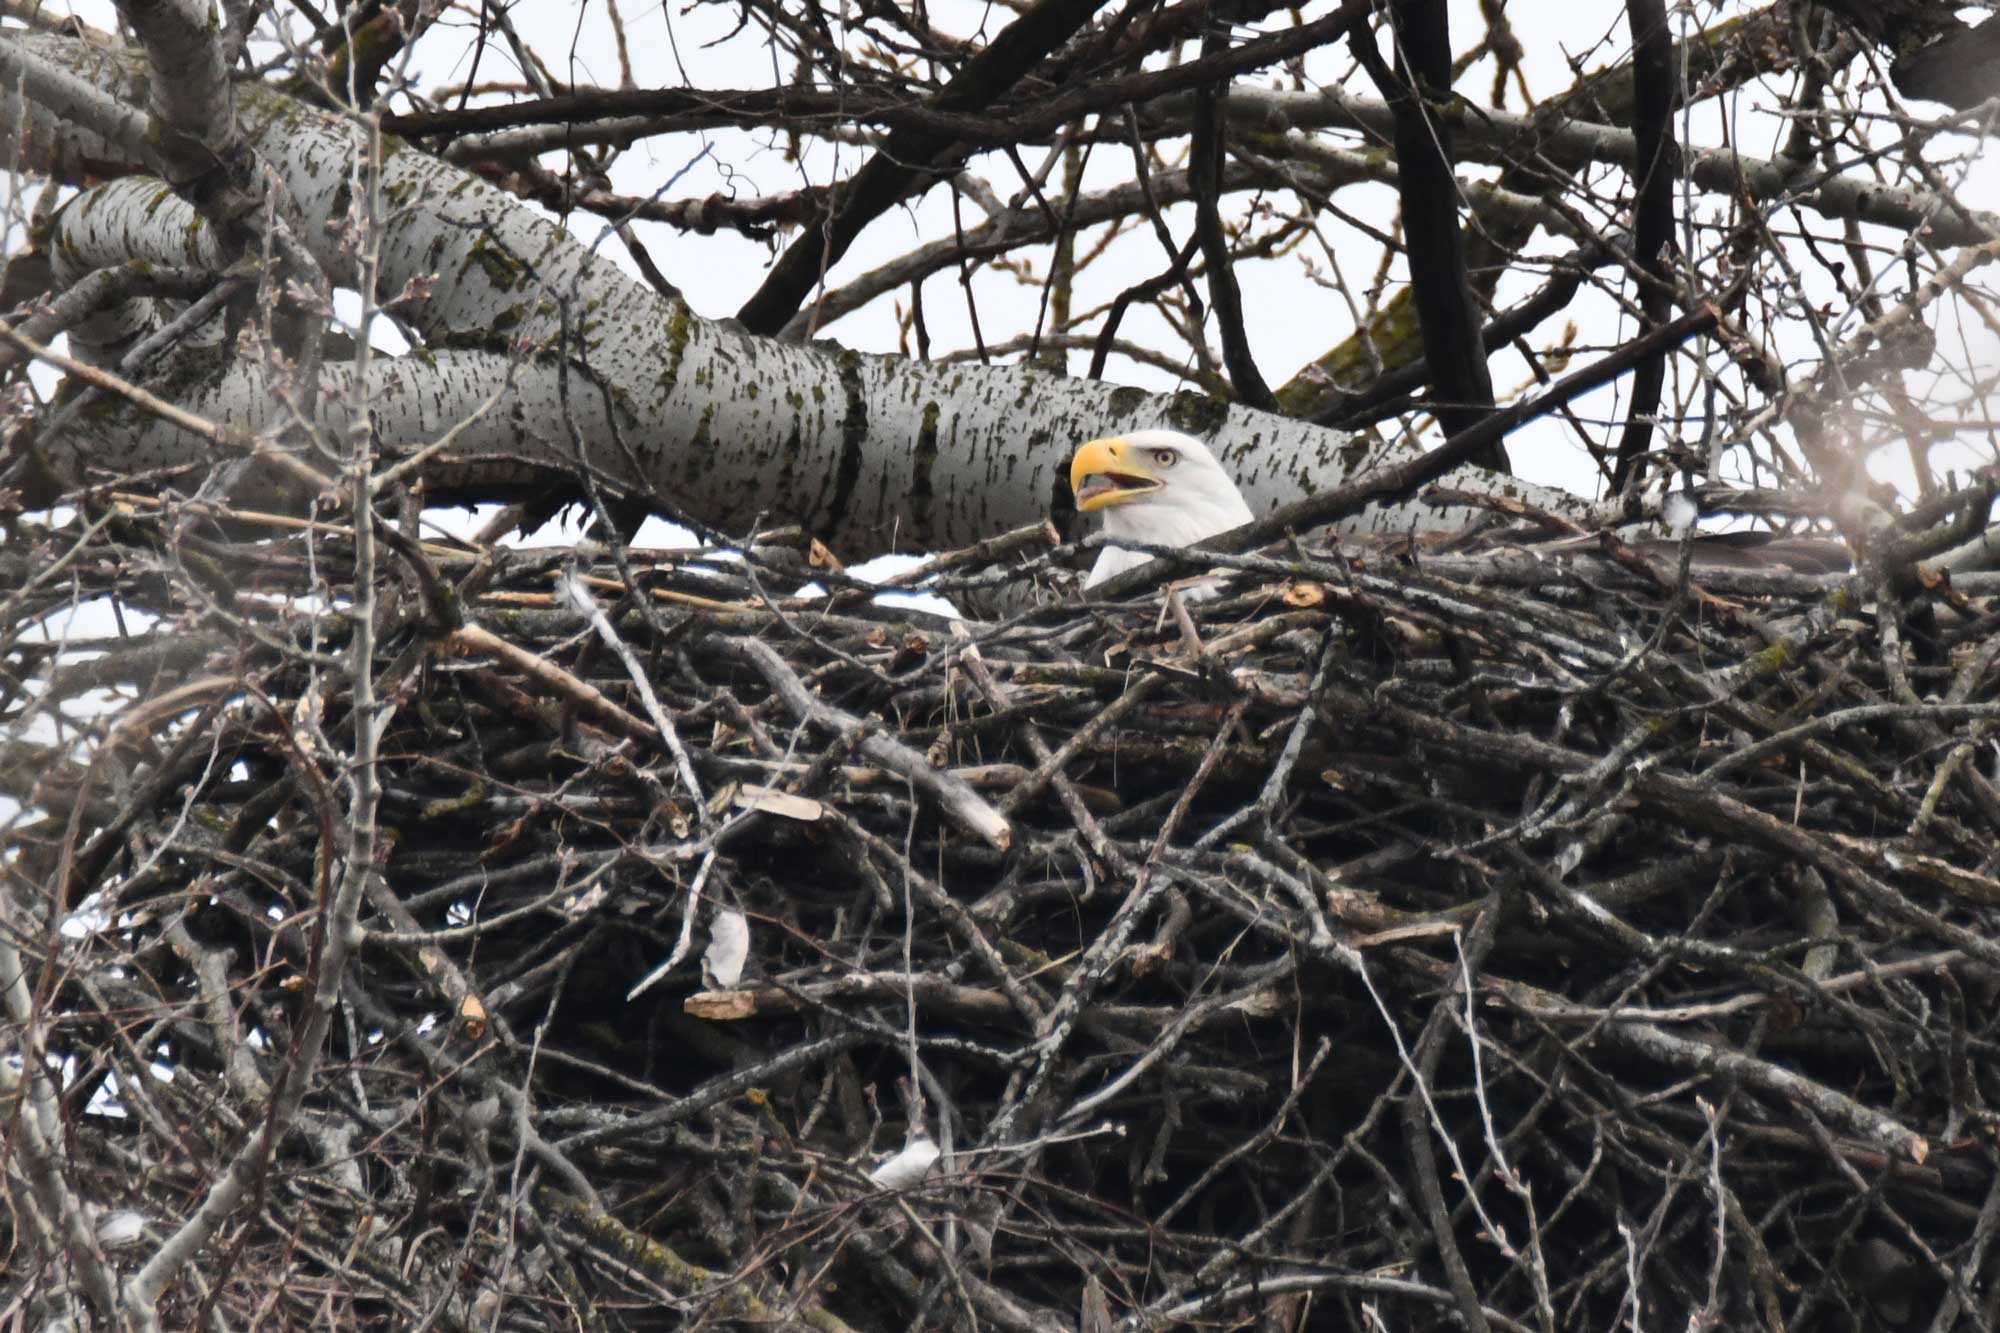 Bald eagle update: We now have four mated pairs incubating eggs